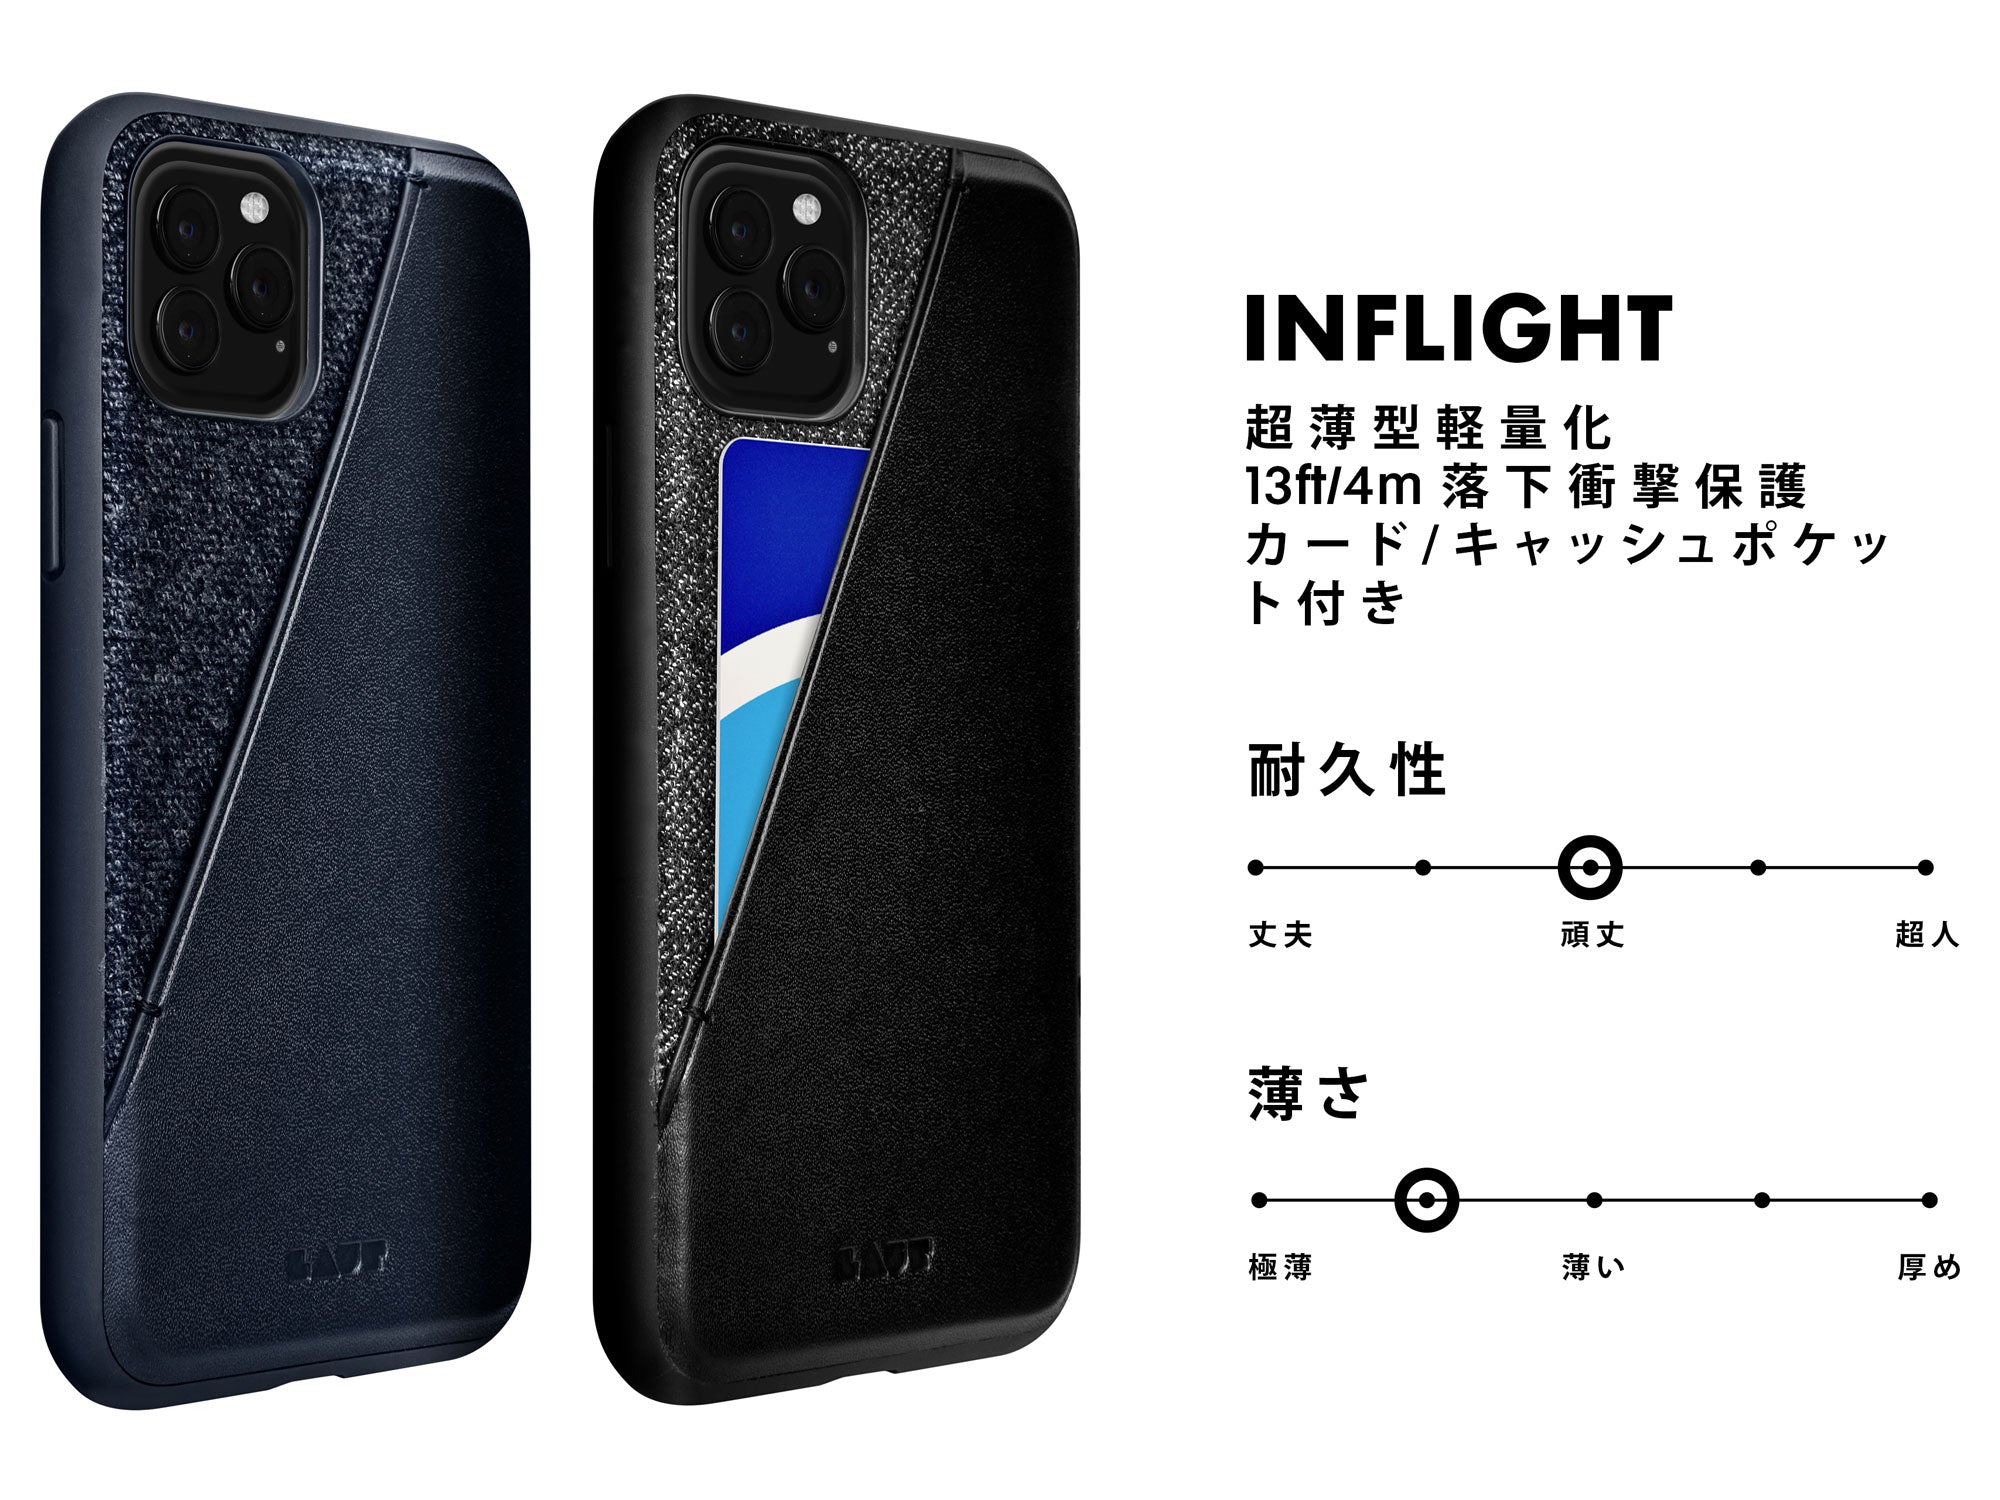 LAUT INFLIGHT CARD CASE for iPhone 11 | iPhone 11 Pro | iPhone 11 Pro Max